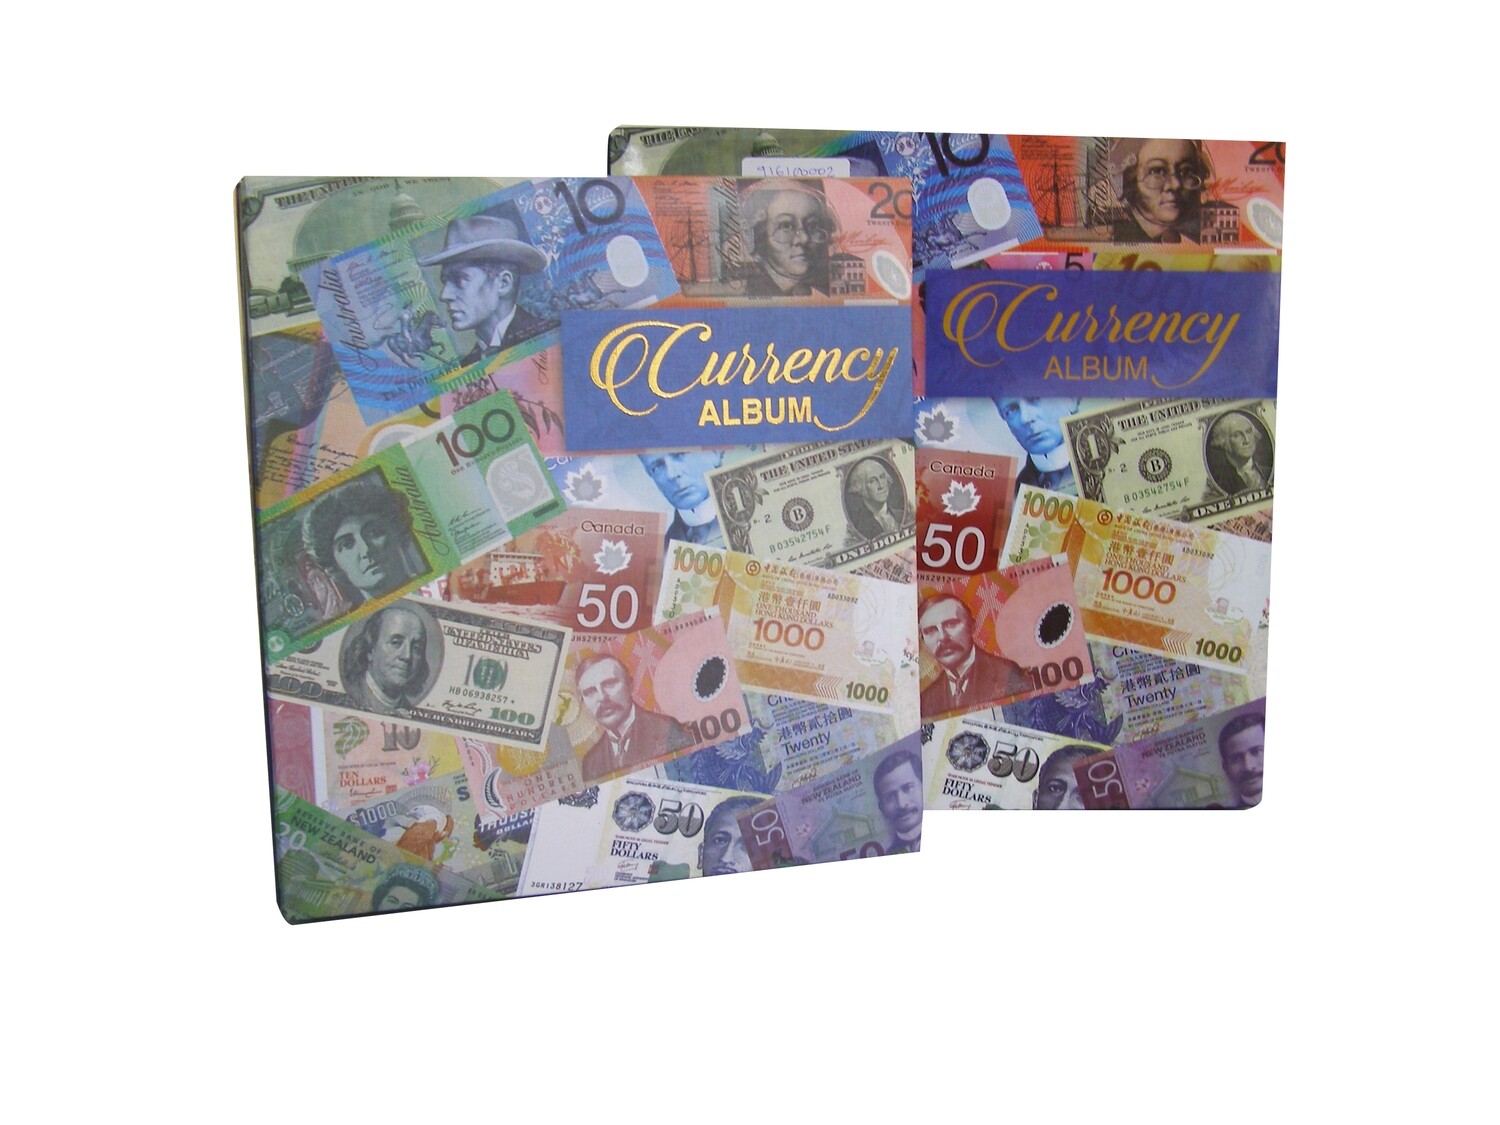 WELCOME/ARCHIES CURRENCY ALBUM LARGE 599 CUA-05